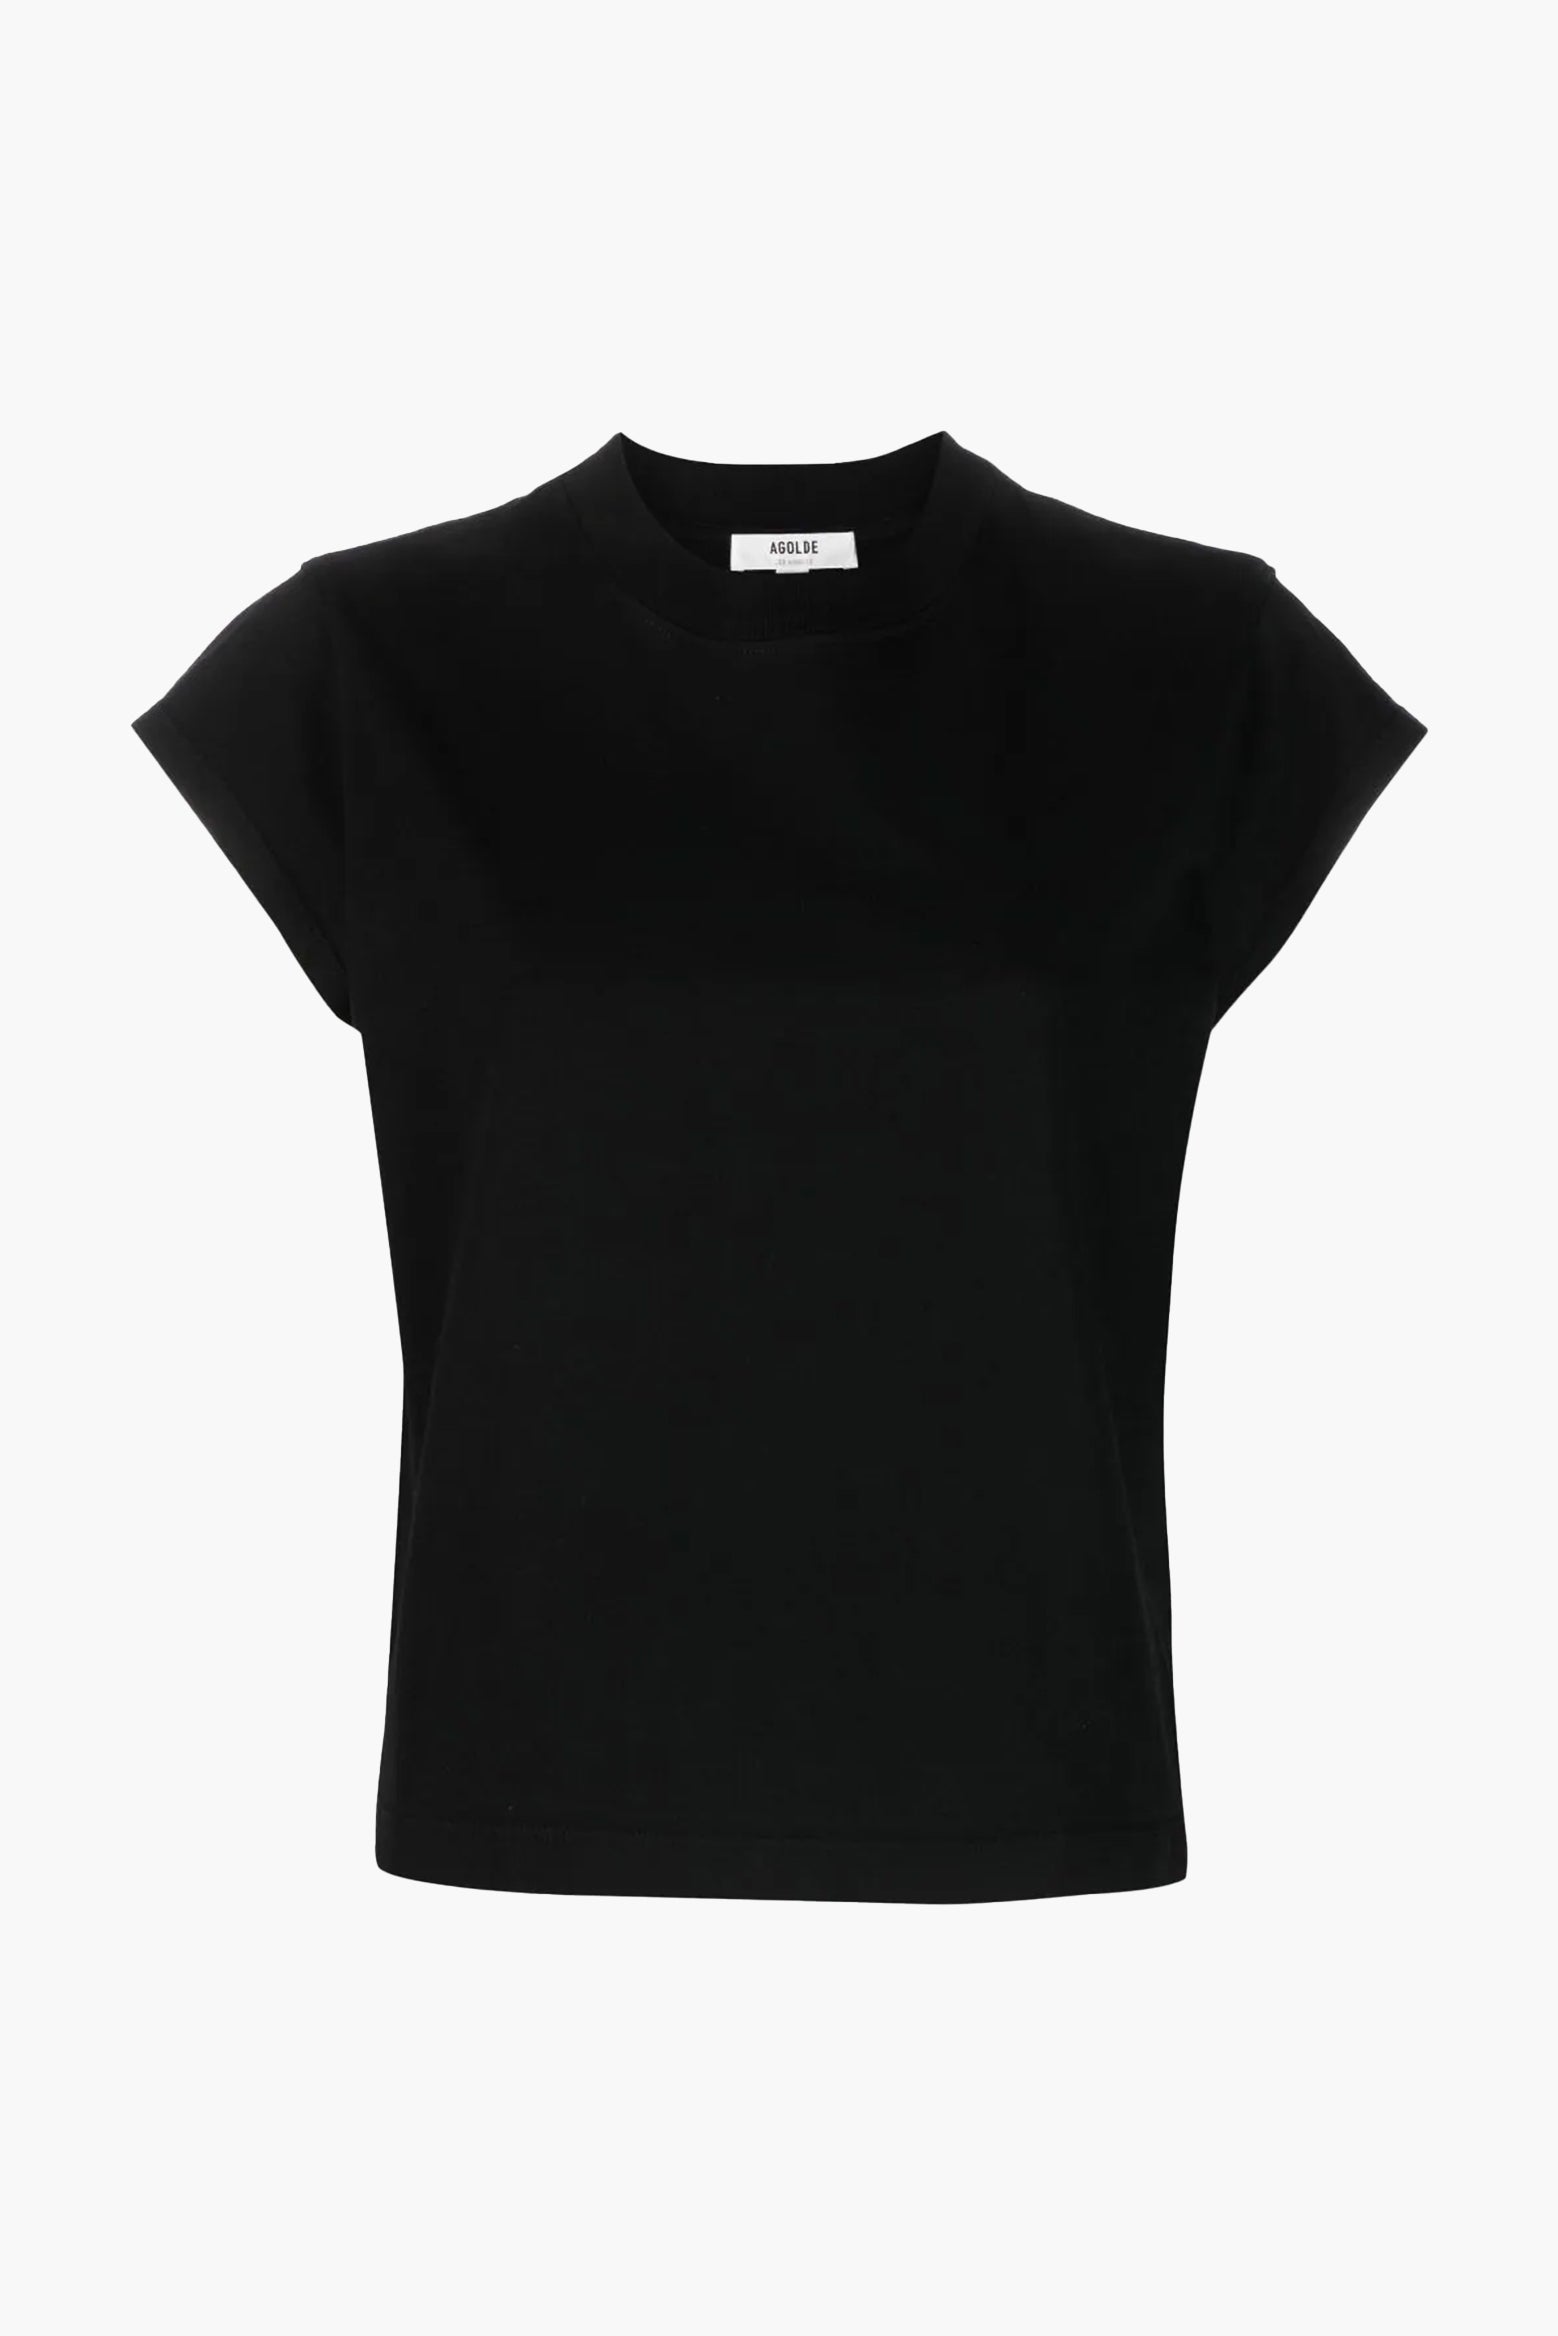 Agolde Bryce Cap Sleeve Tee in Black available at The New Trend Australia.